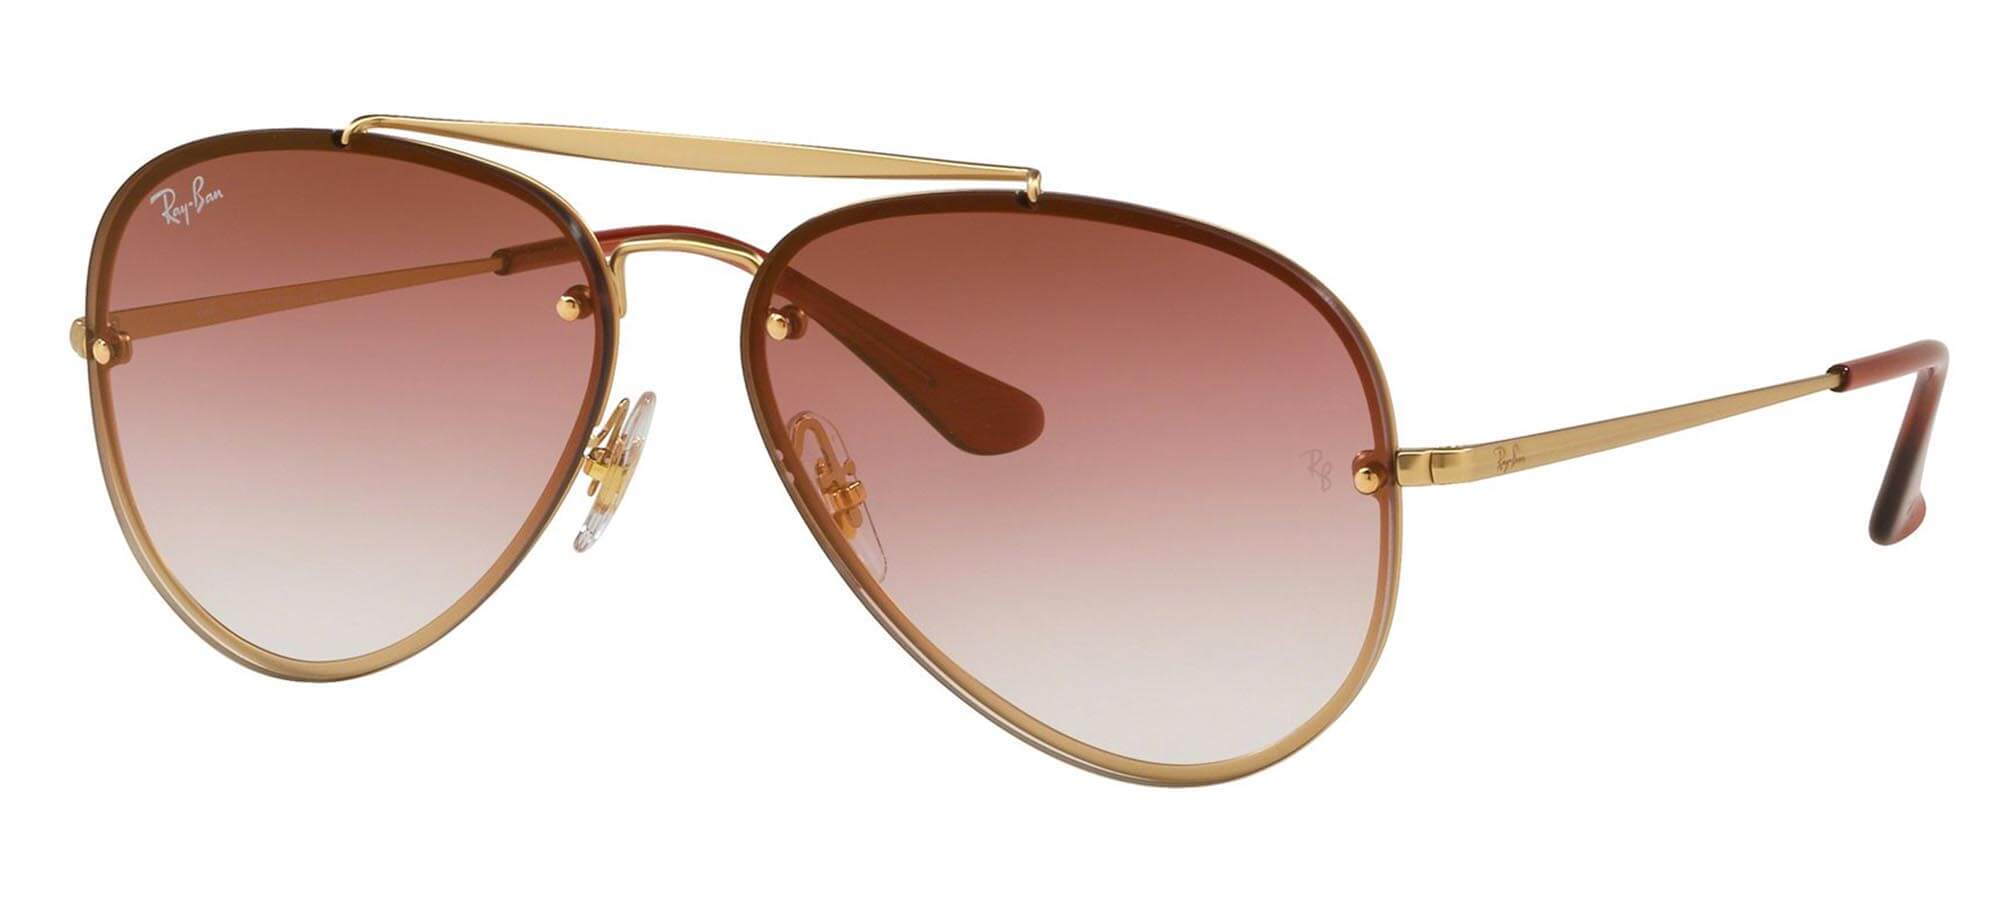 Ray-BanBLAZE LARGE AVIATOR RB 3584NGold/brown Pink Shaded (9140/0T)